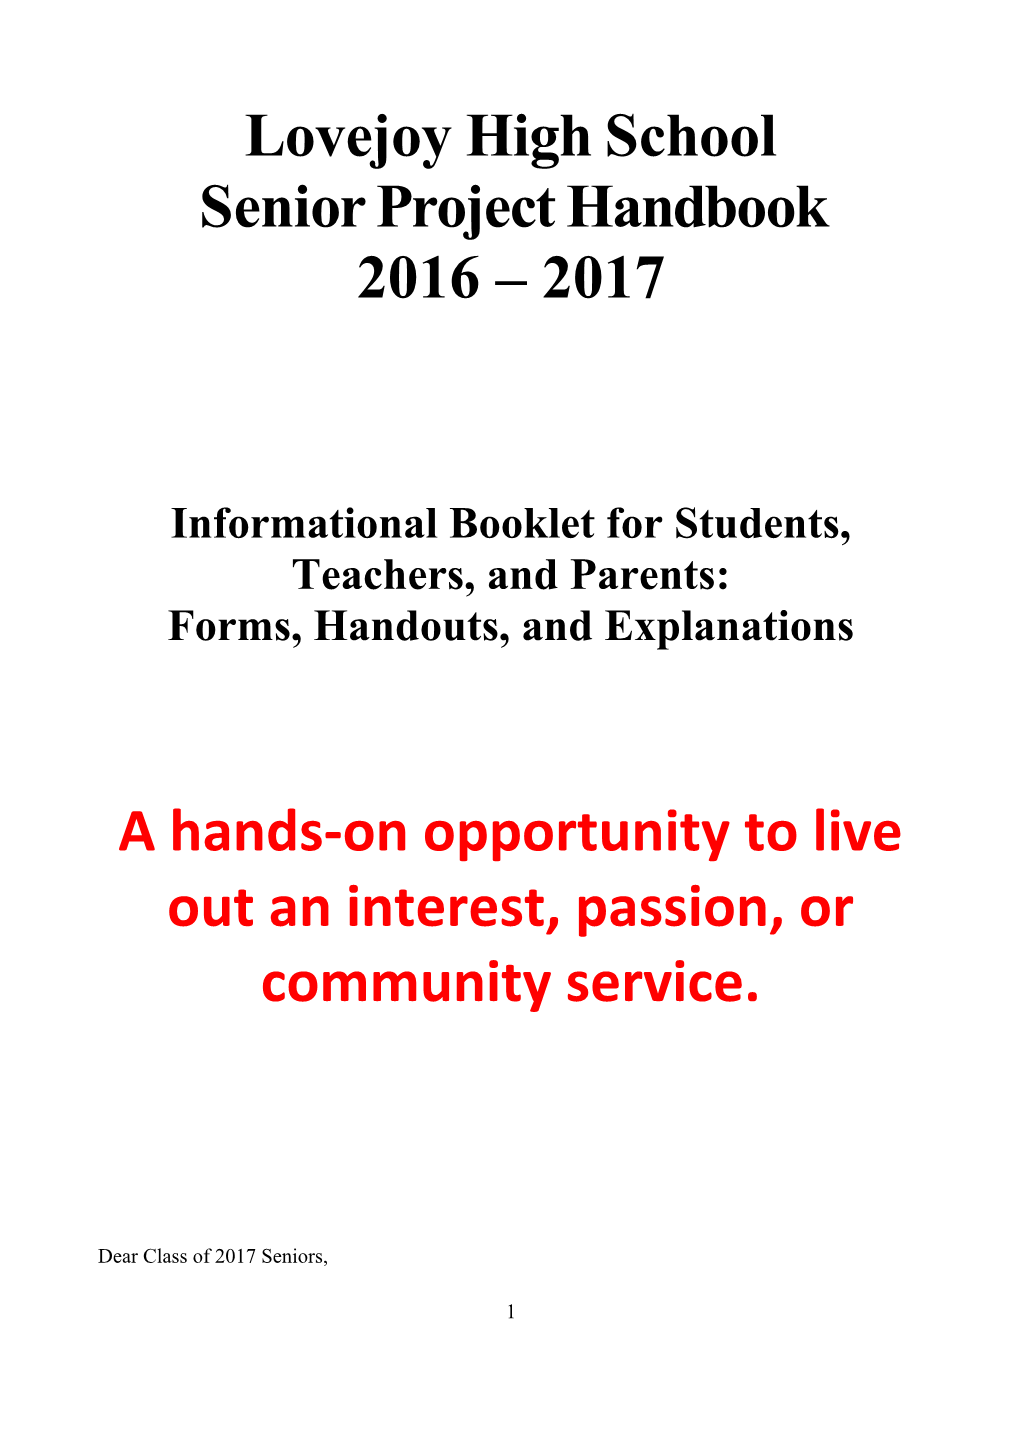 Informational Booklet for Students, Teachers, and Parents